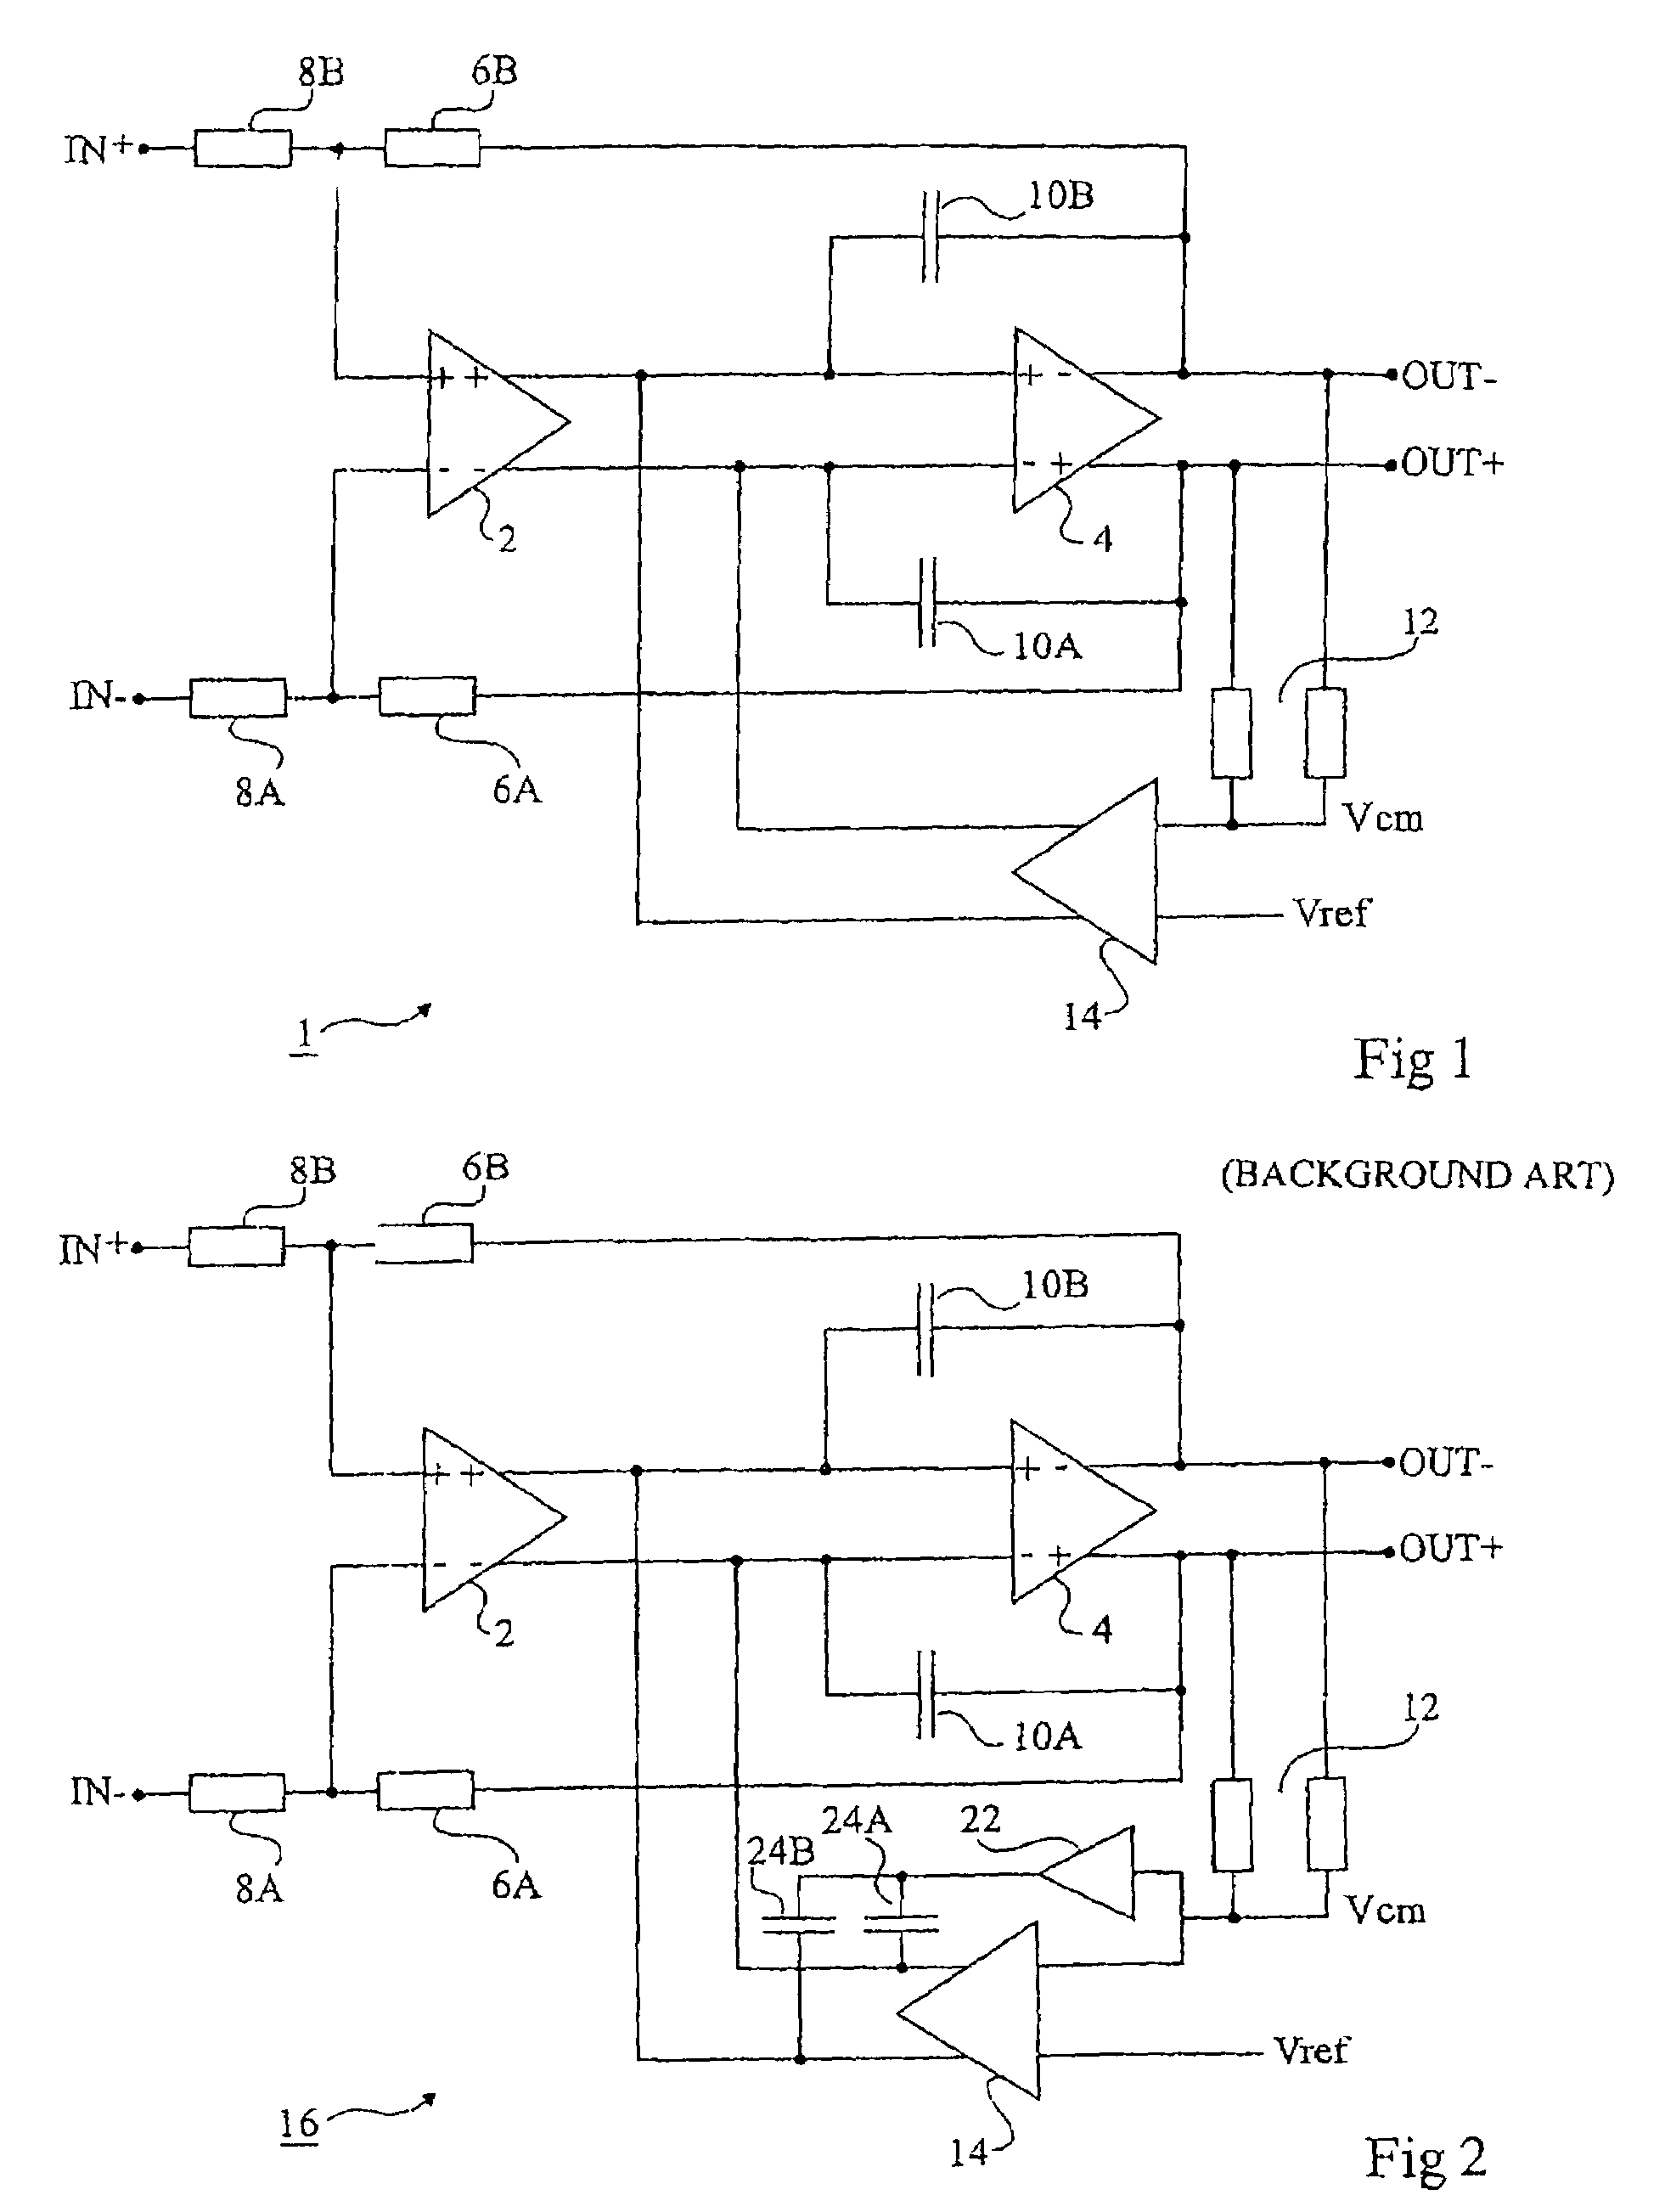 Differential amplifier with a common mode voltage loop